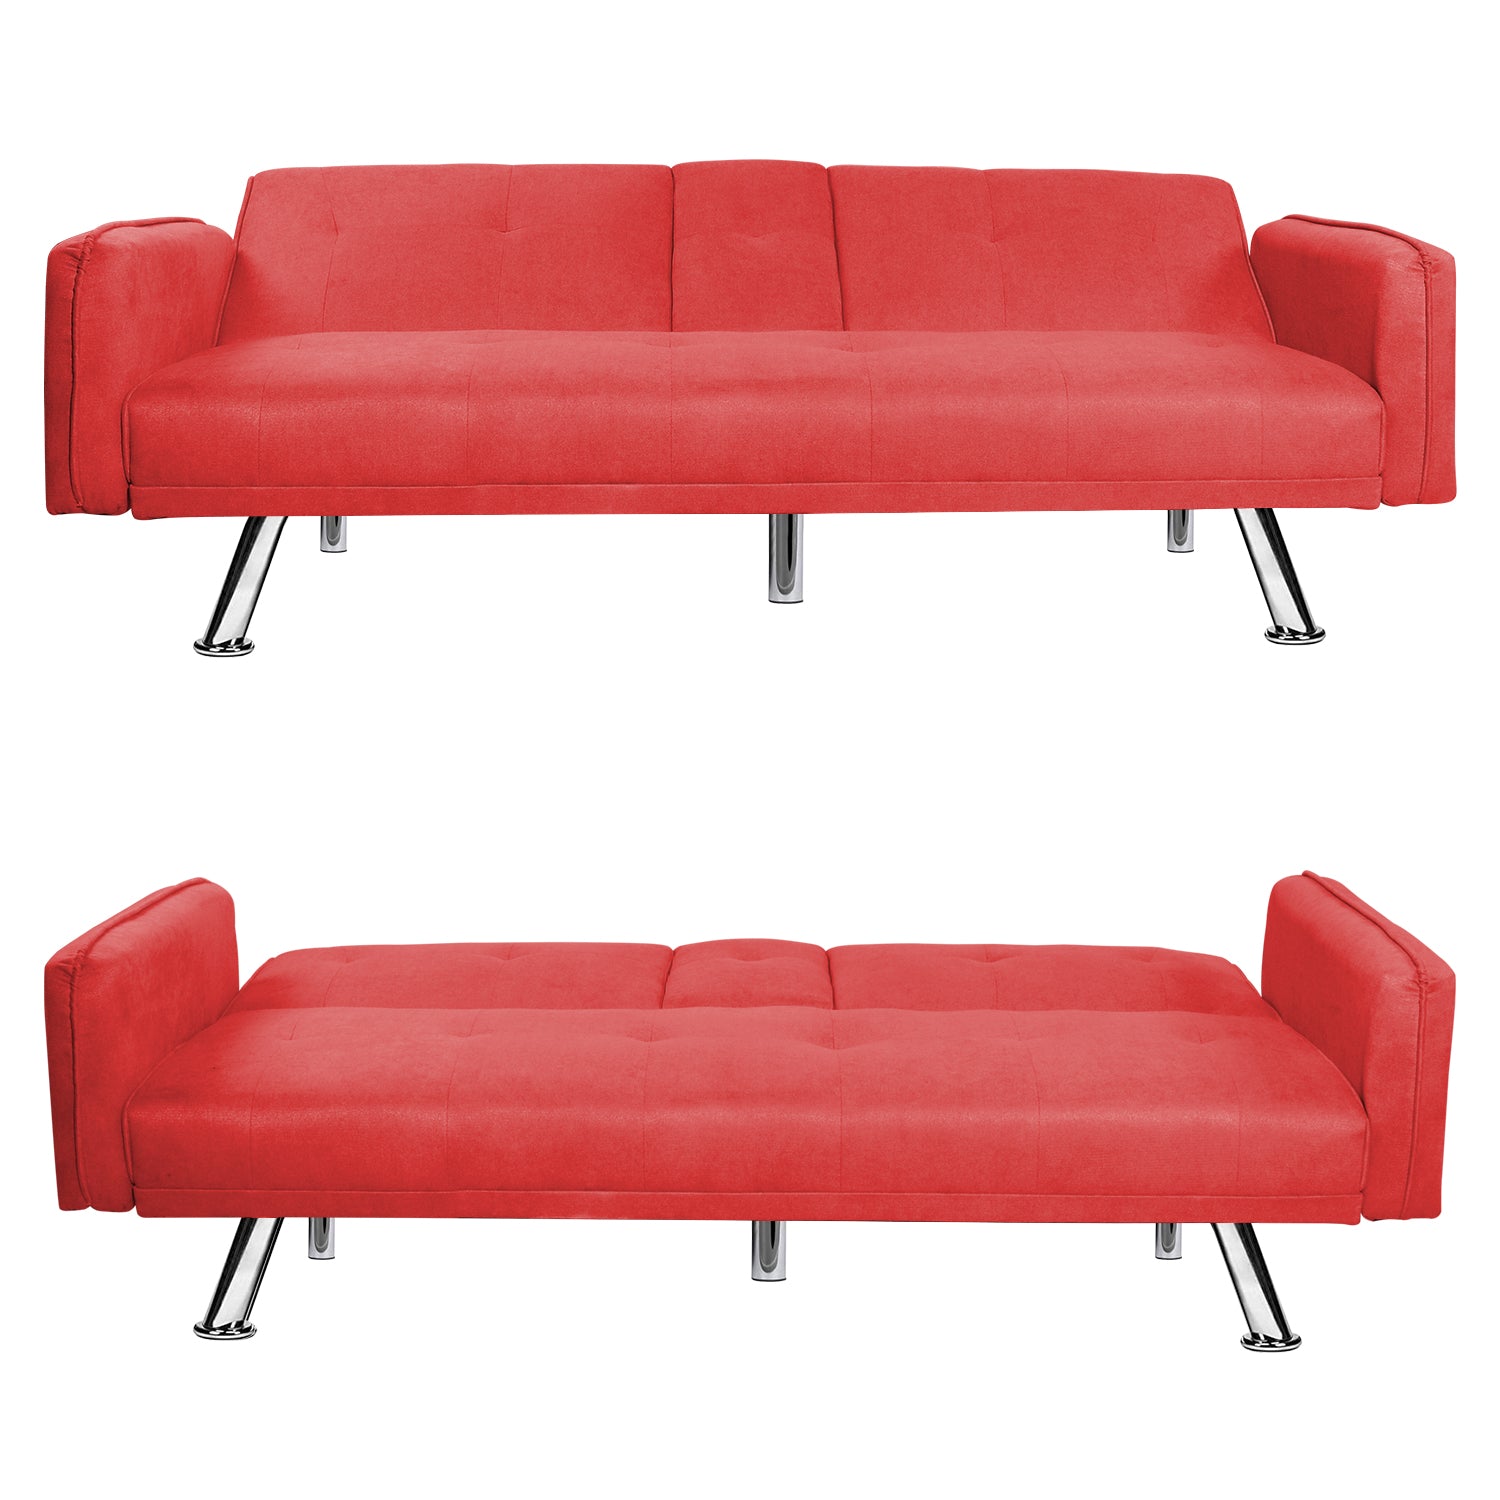 Modern simple sofa, living room sofa, cushioned, multifunctional, solid wood frame (red)